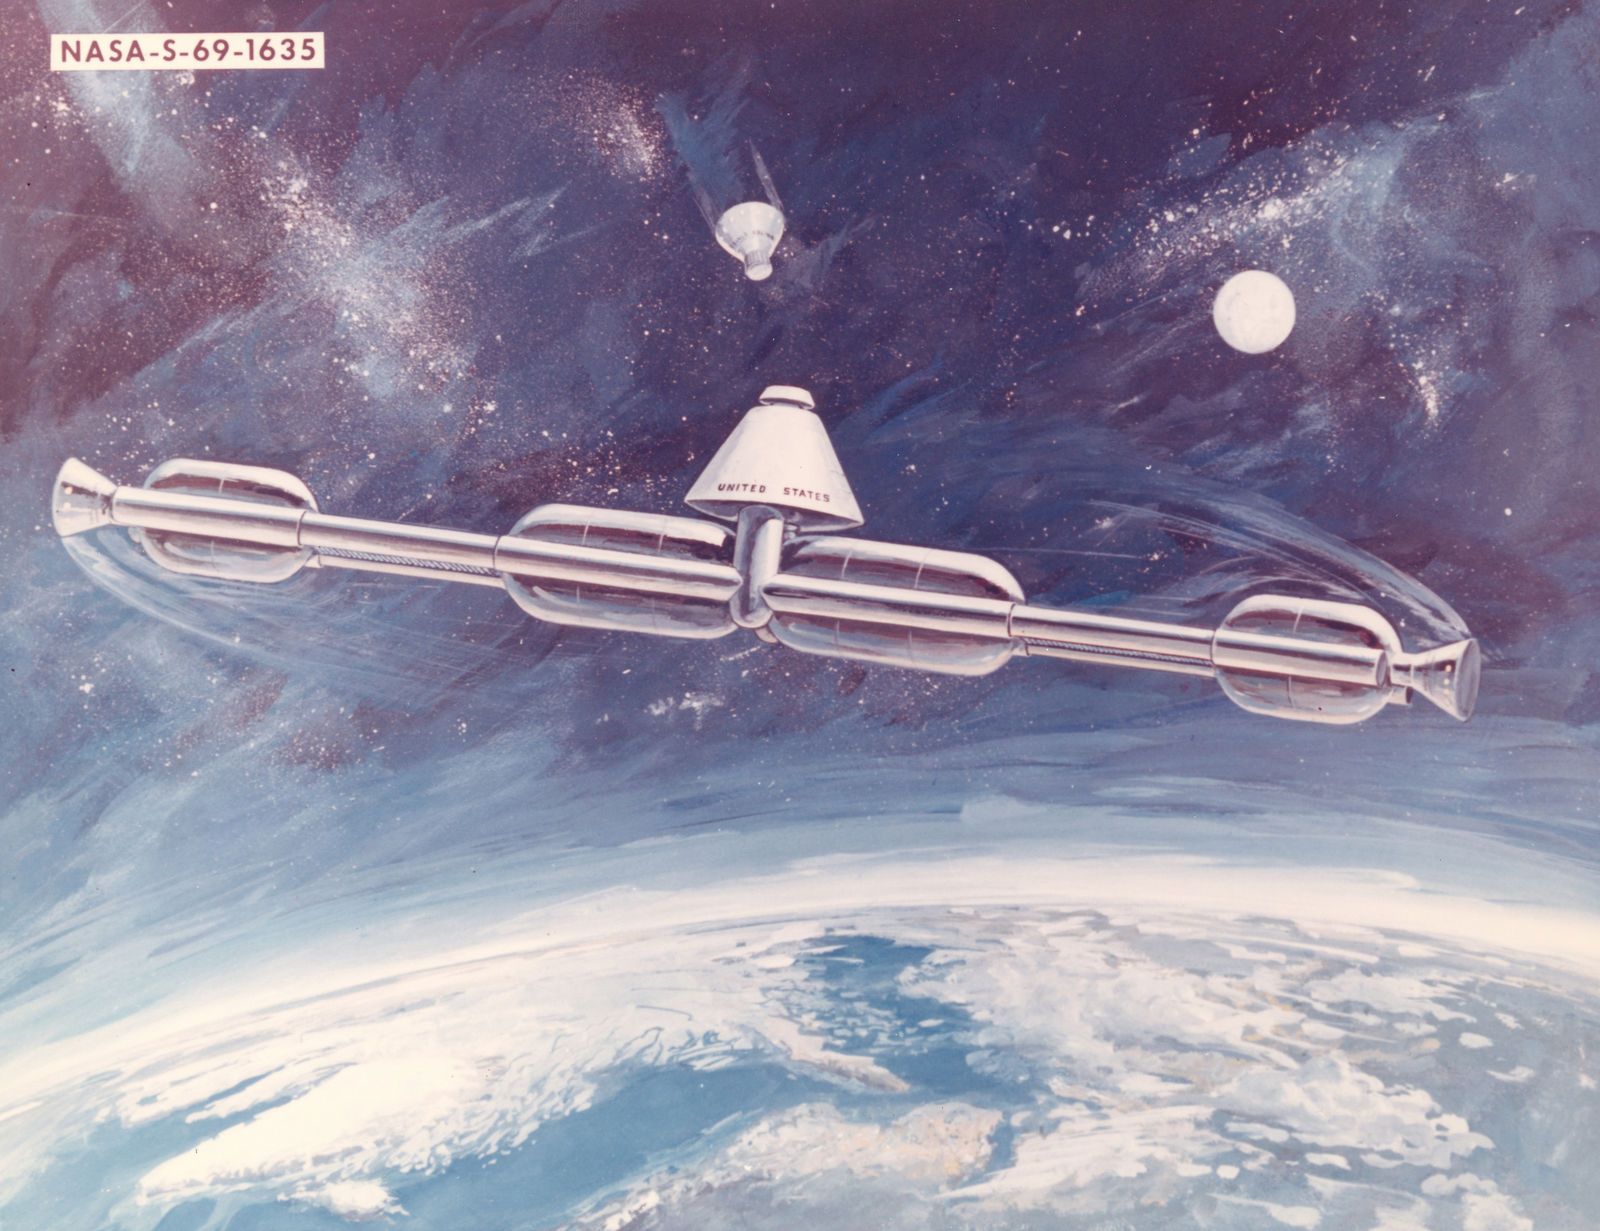 Space station concept images image 5